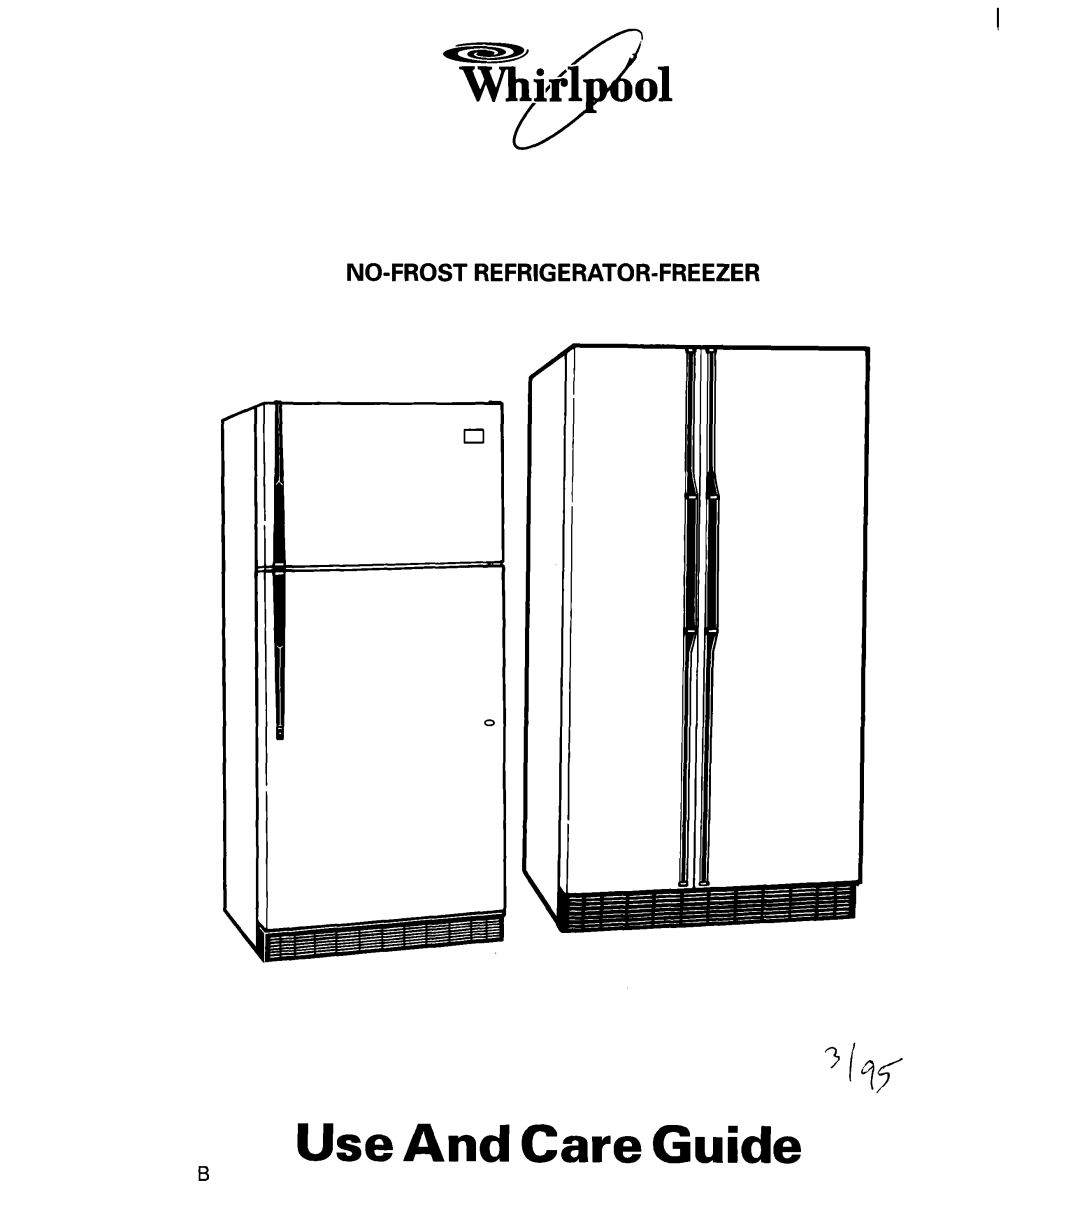 Whirlpool 4YED27DQDN00 manual Use And Care Guide, No-Frost Refrigerator-Freezer, 319,F 